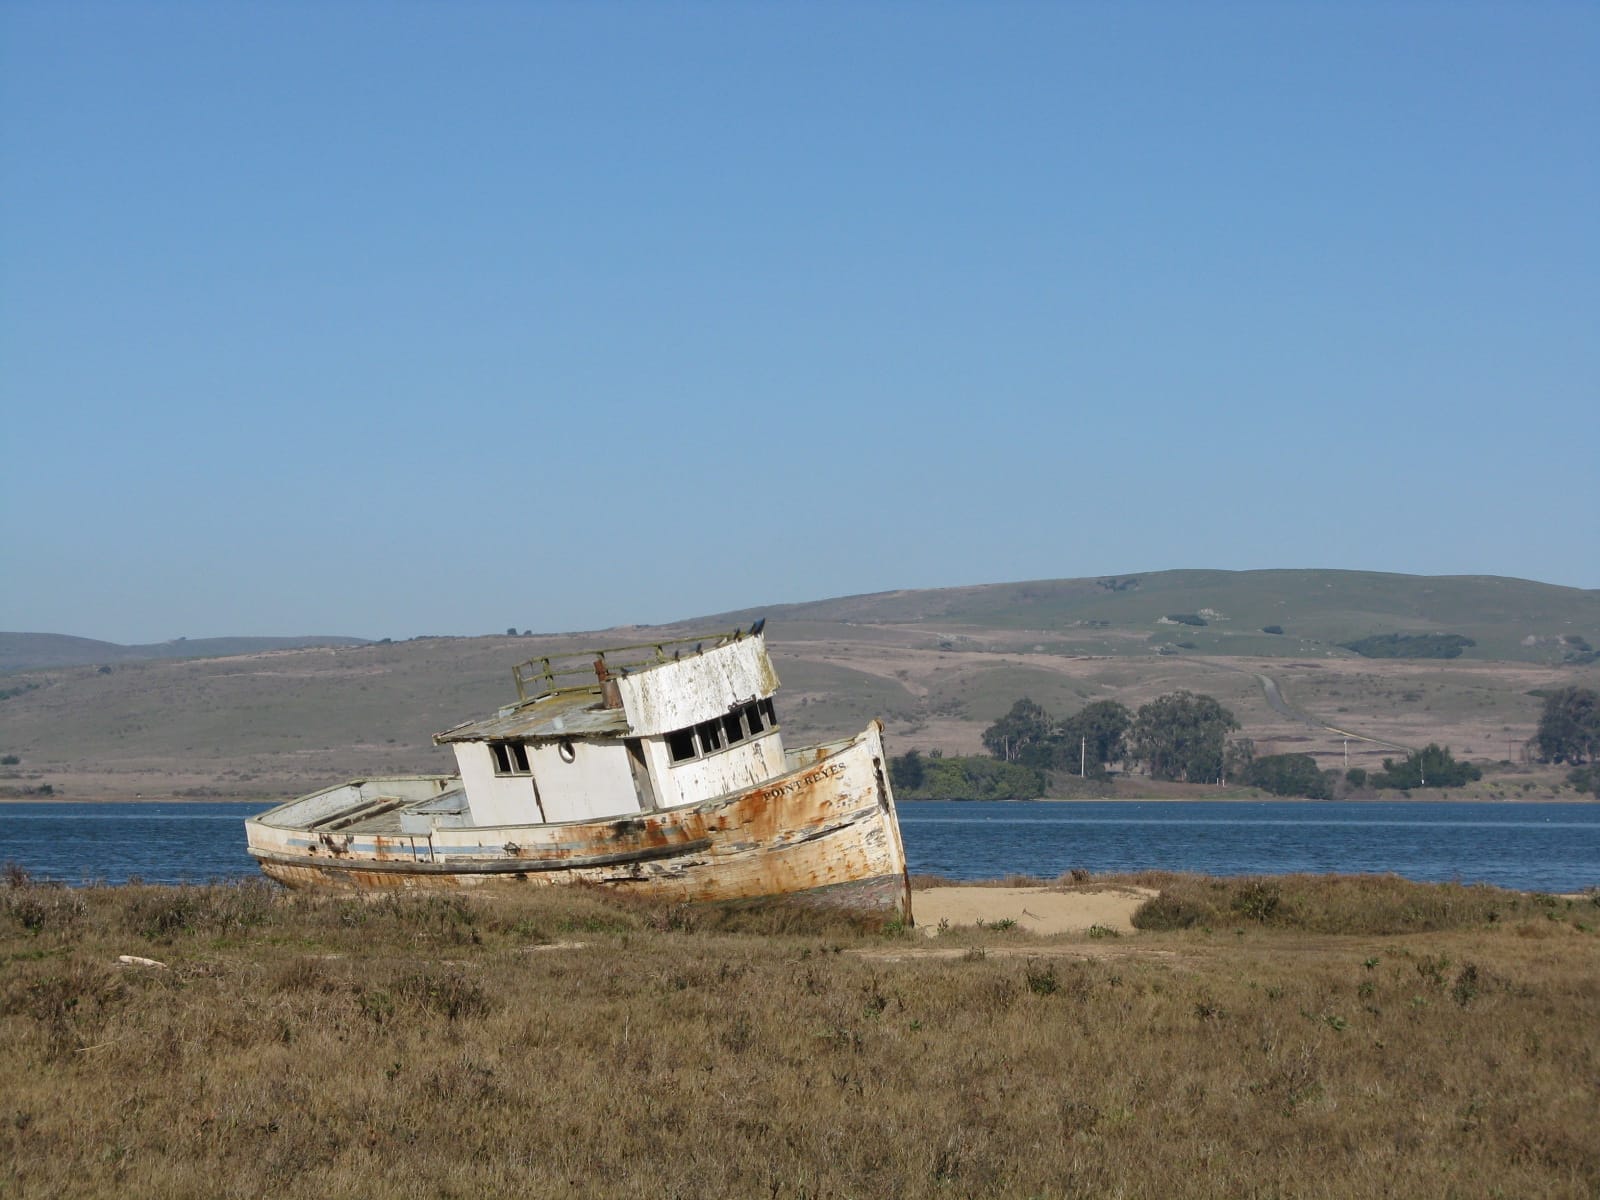 An old boat run aground somewhere in Marin County.